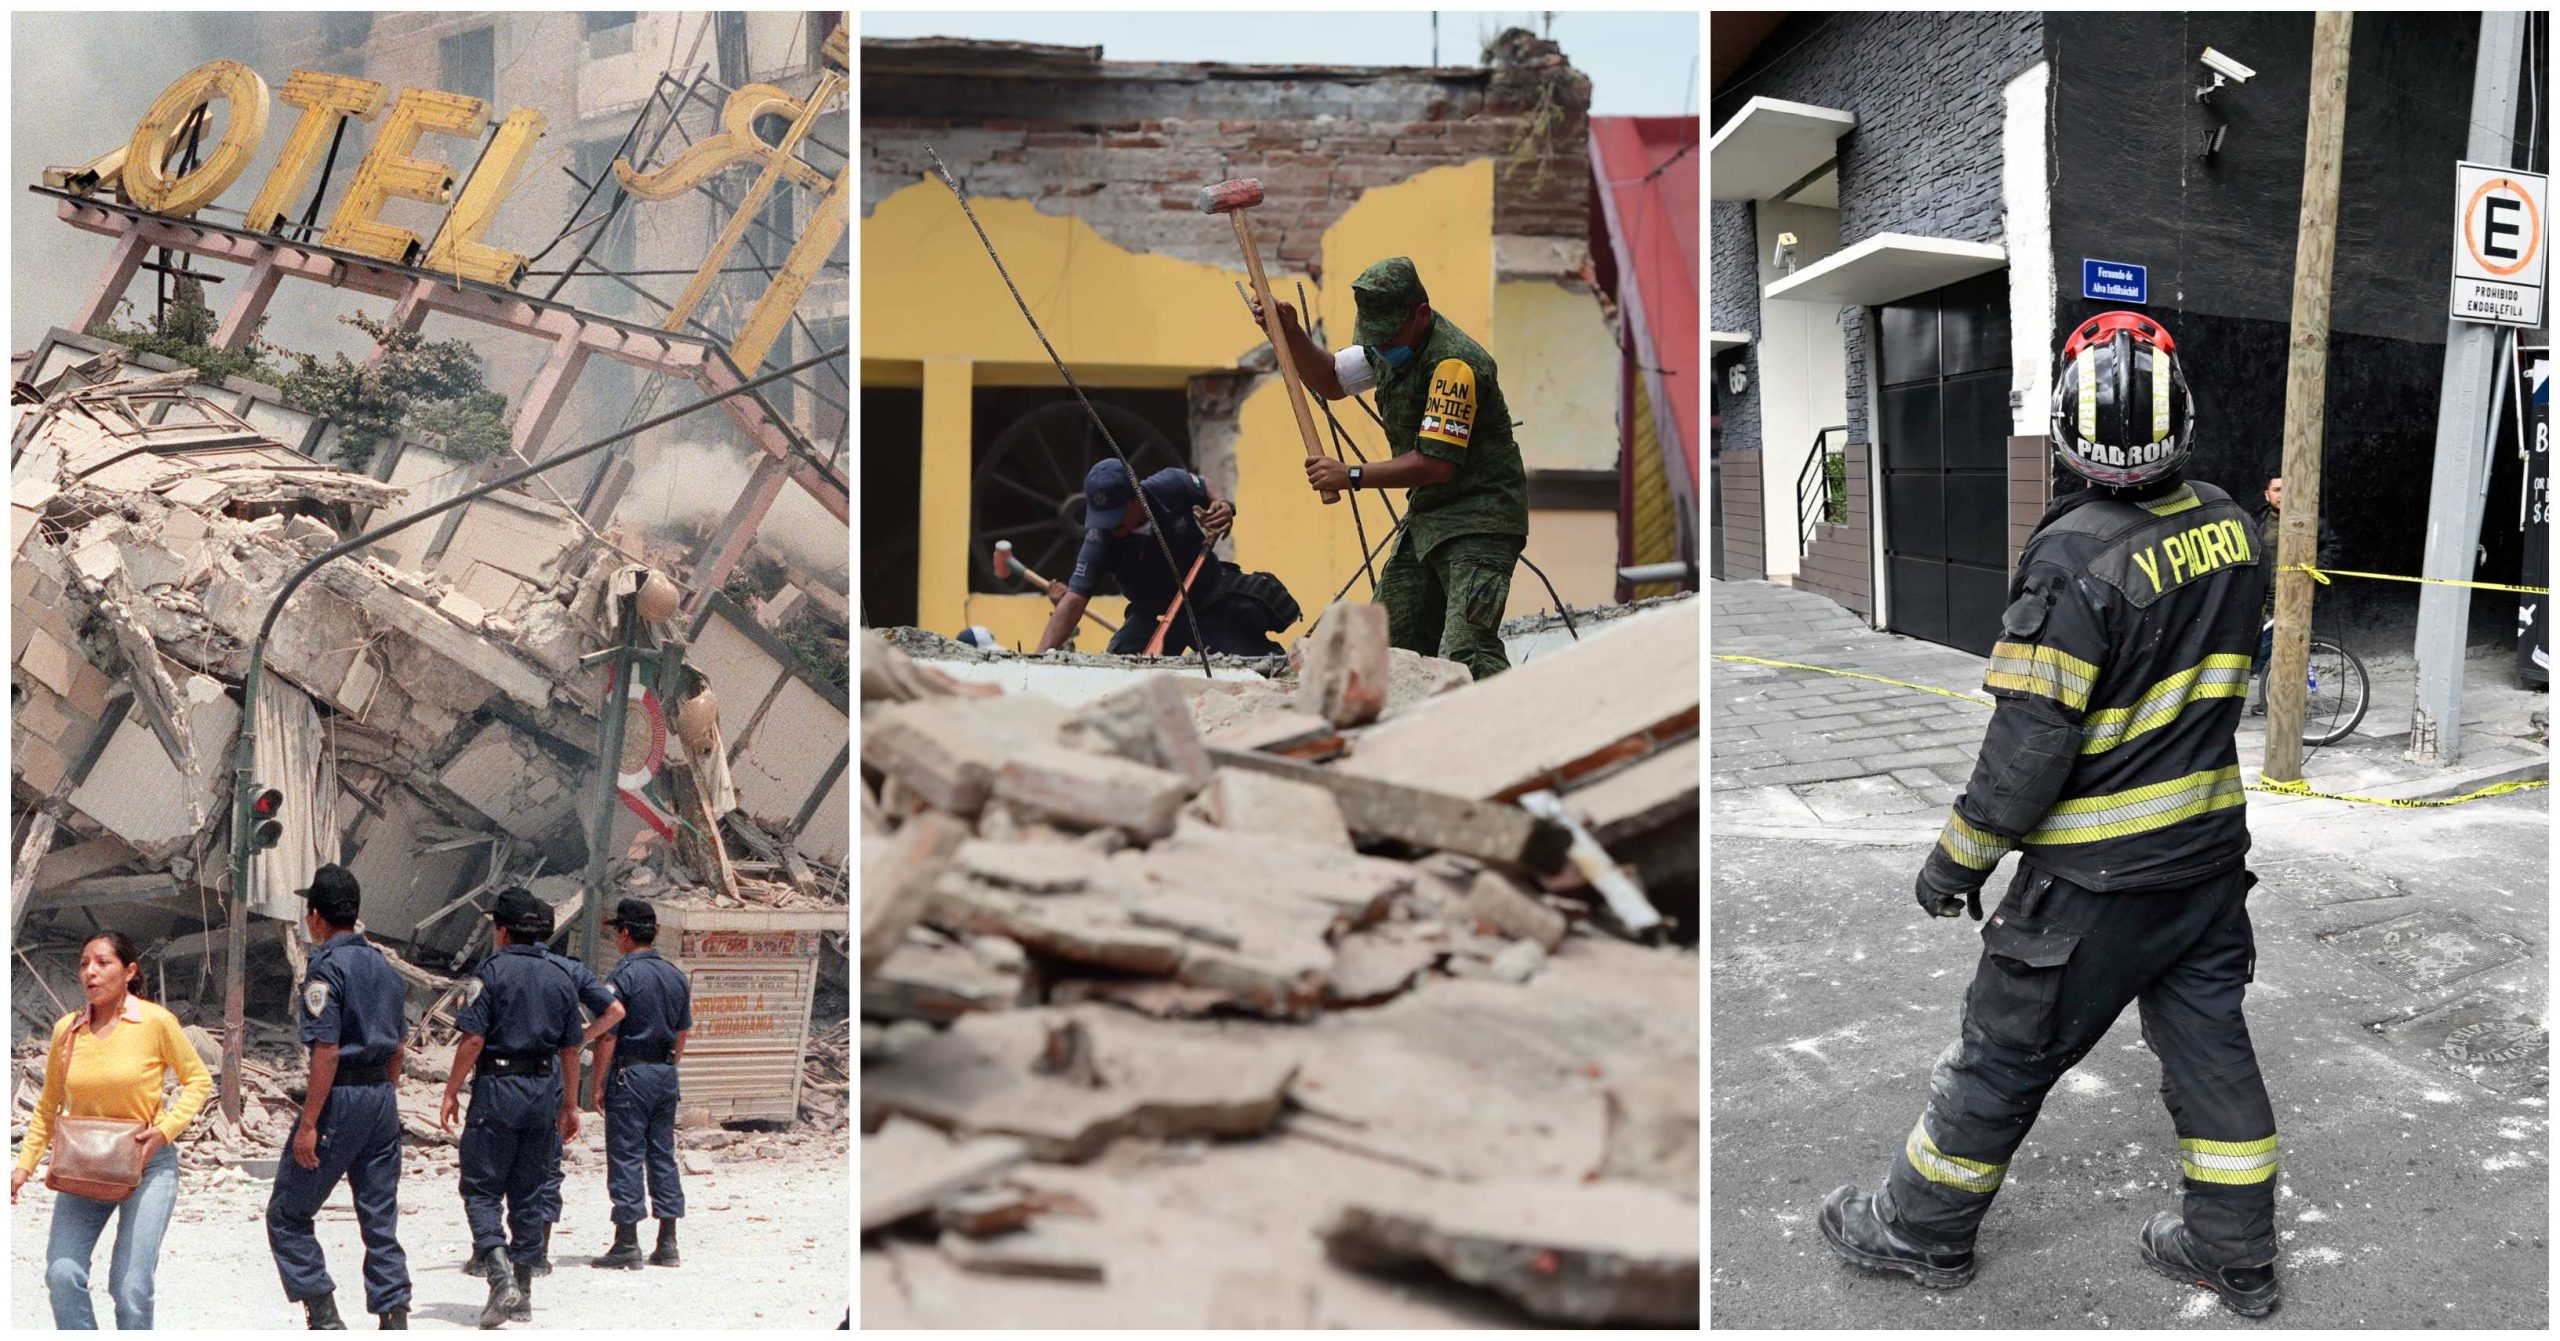 Mexico and the September 19 earthquake: an “unpleasant coincidence”